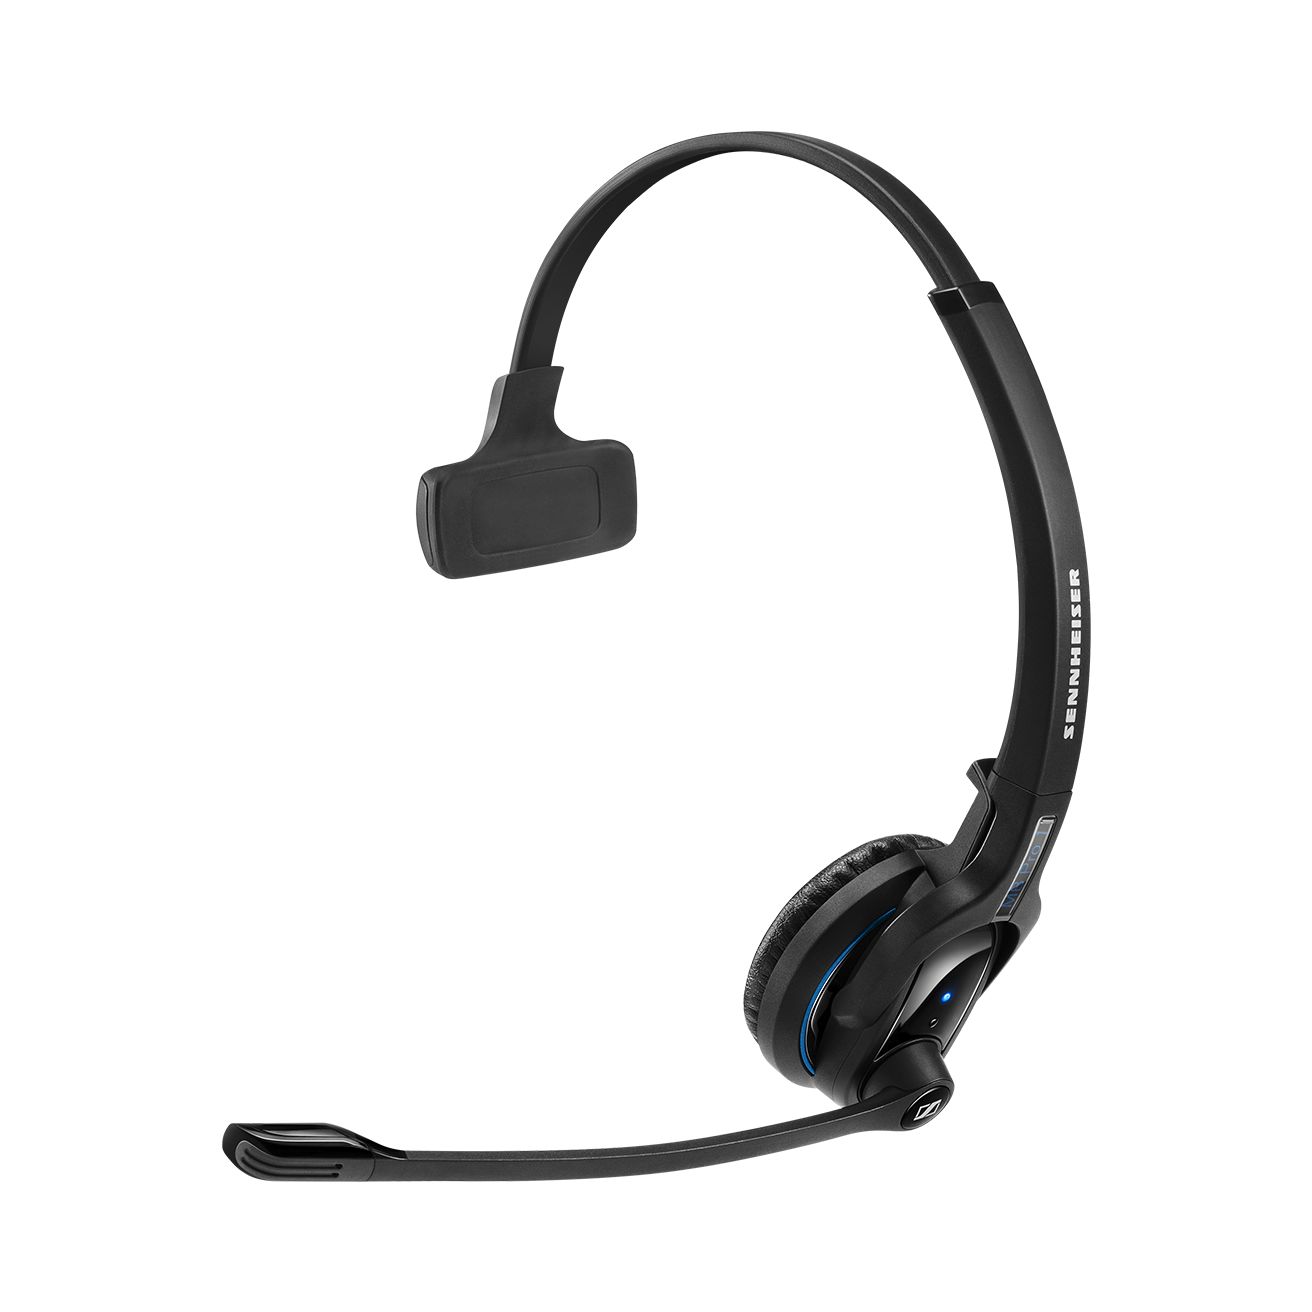 MB Pro 1 MB Pro 1 - High End Bluetooth Mobile Business headset